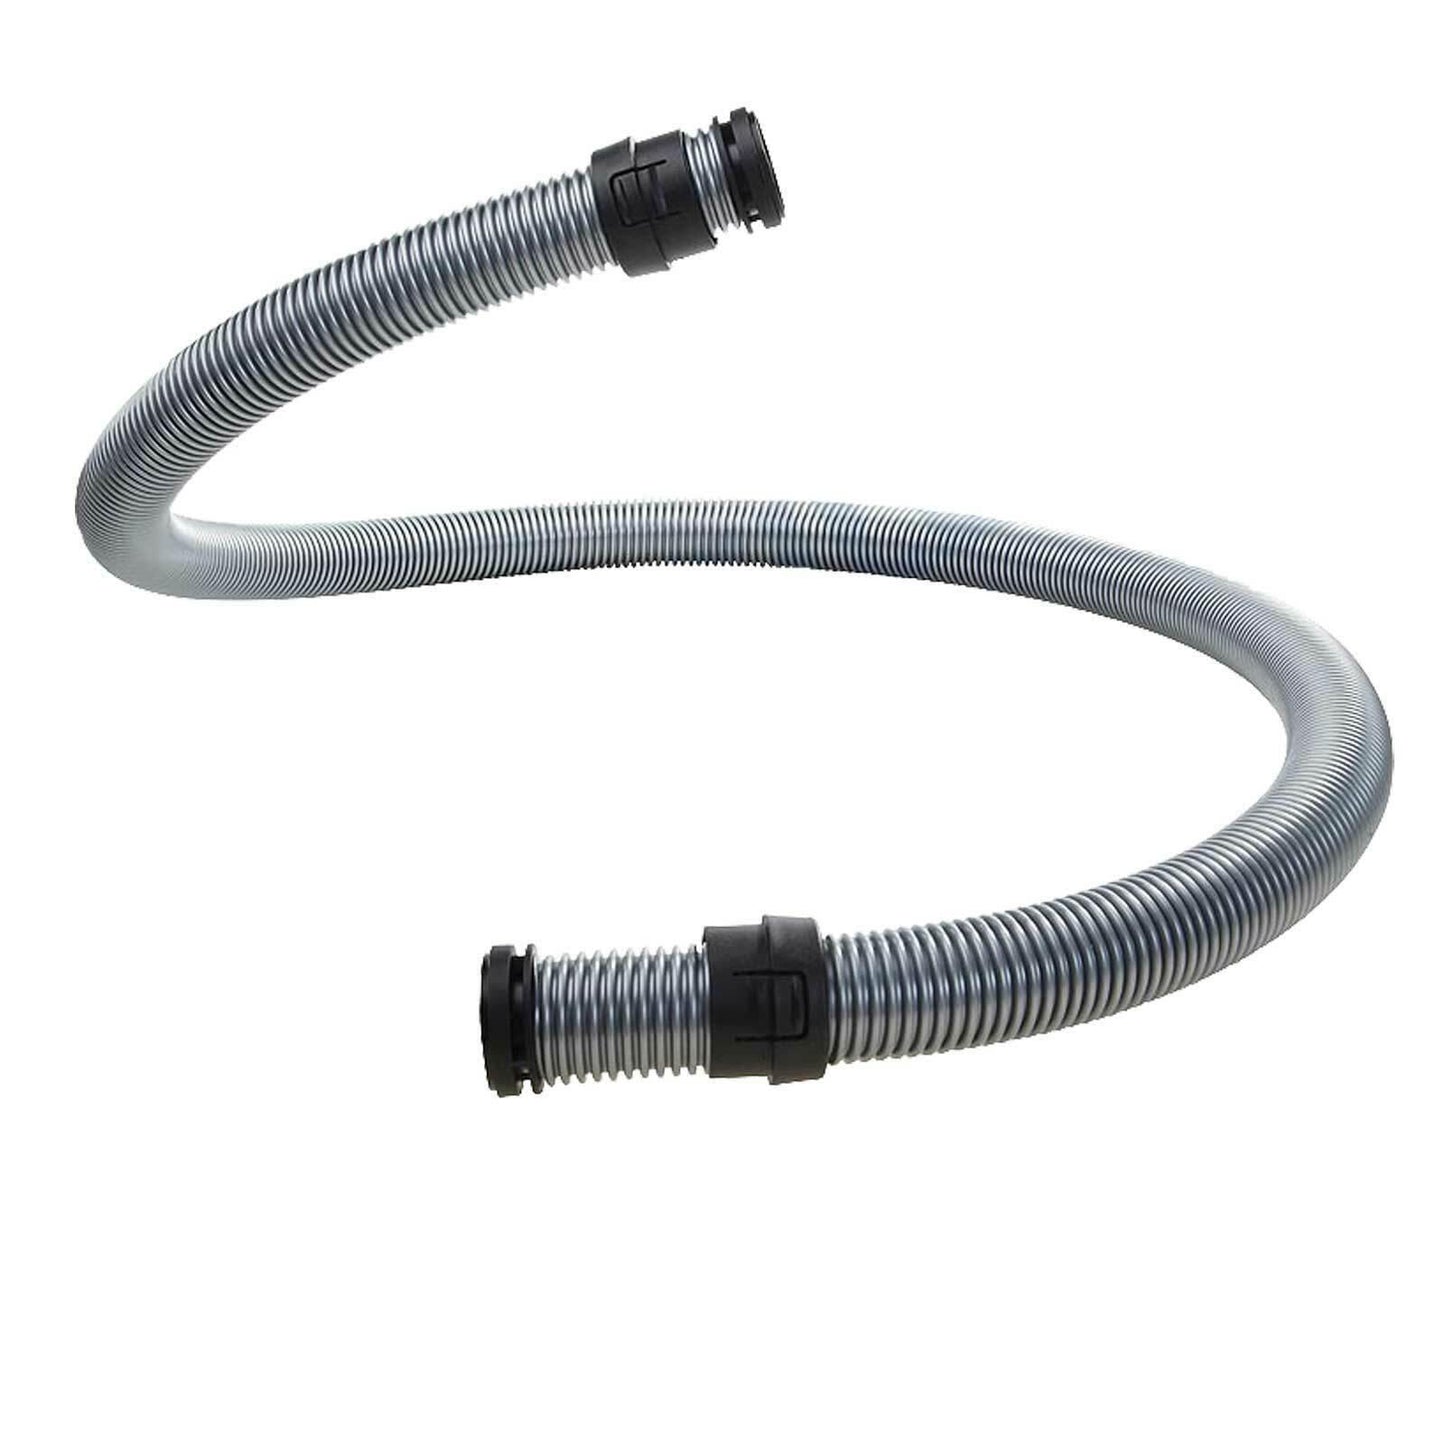 Vacuum Cleaner Suction Hose 1.8M For Miele Classic C1 S2 S2000 Series 07736191 Sparesbarn